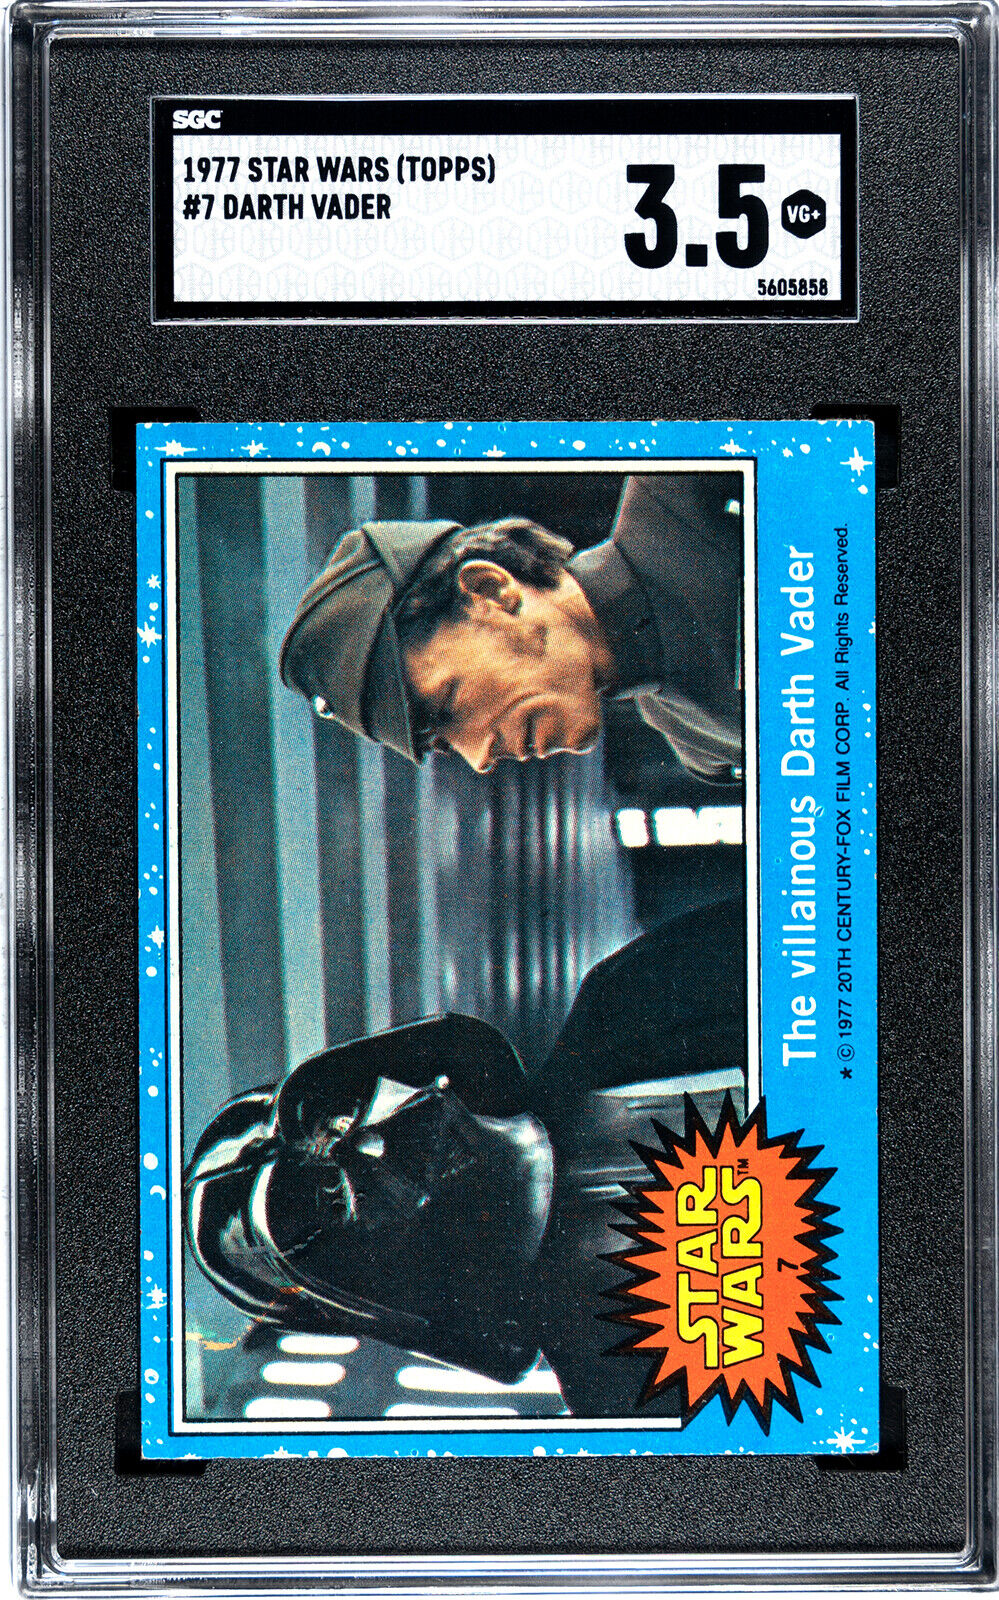 1977 Topps  Star Wars Cards, SGC Graded Pick -A Card